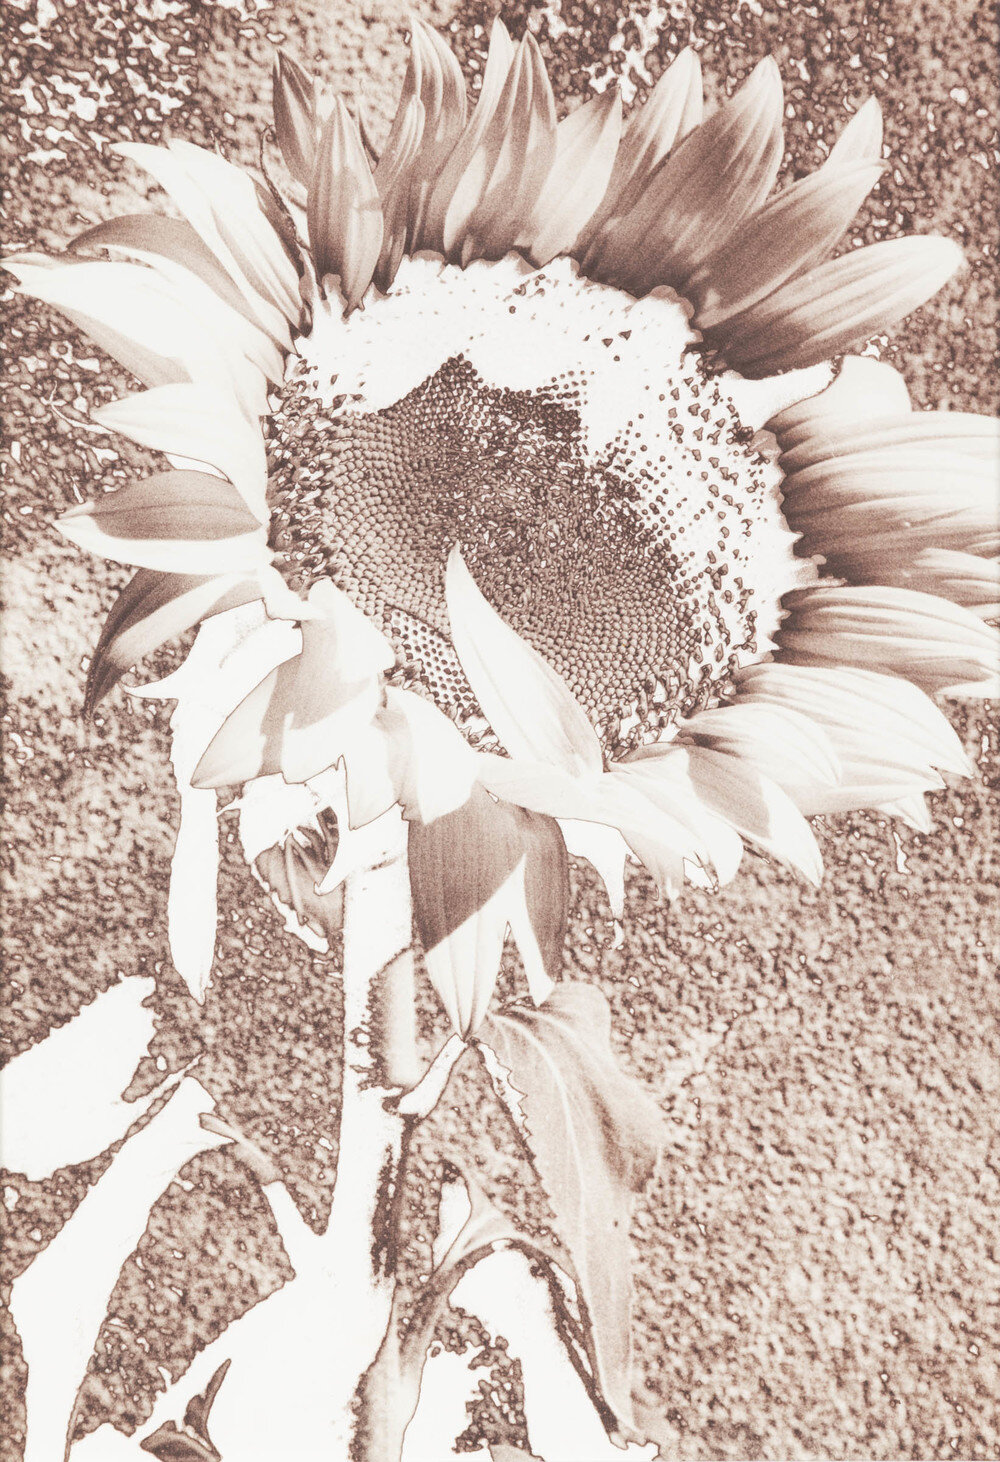   Helianthus , 1990, Mordancage process,25 x 20 inches 